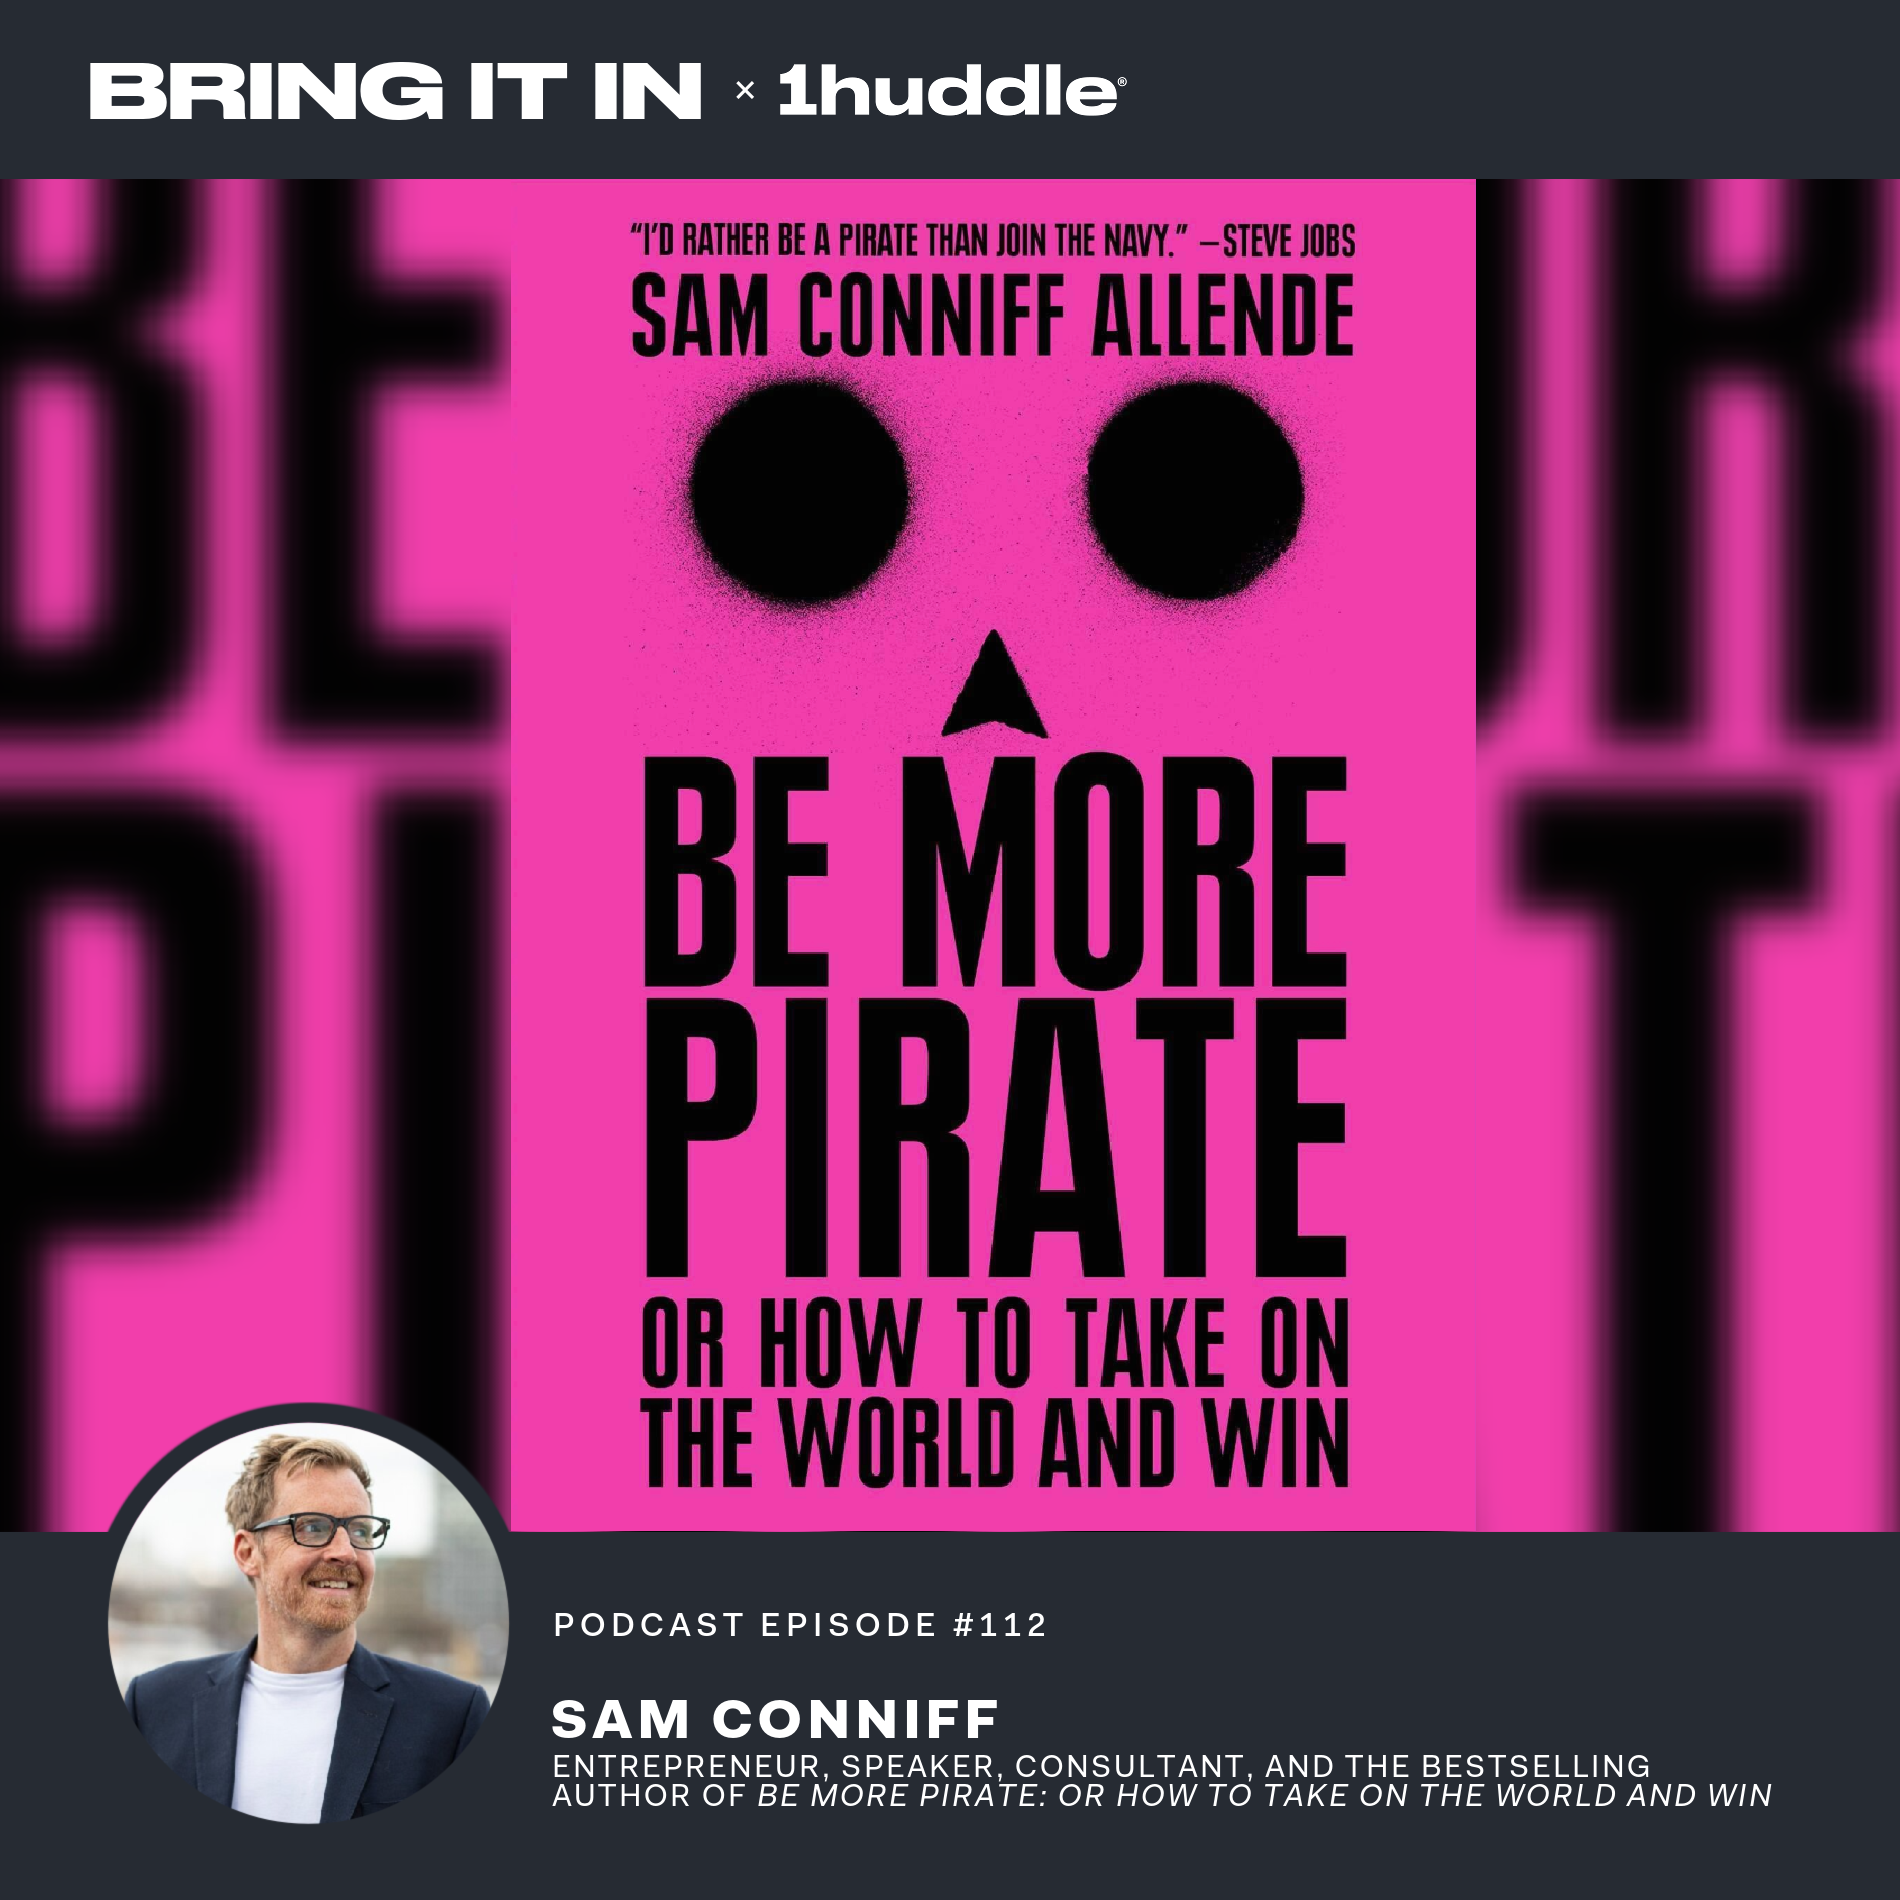 Author of “Be More Pirate: or How To Take On The World And Win” on Pirates and the Future of Work